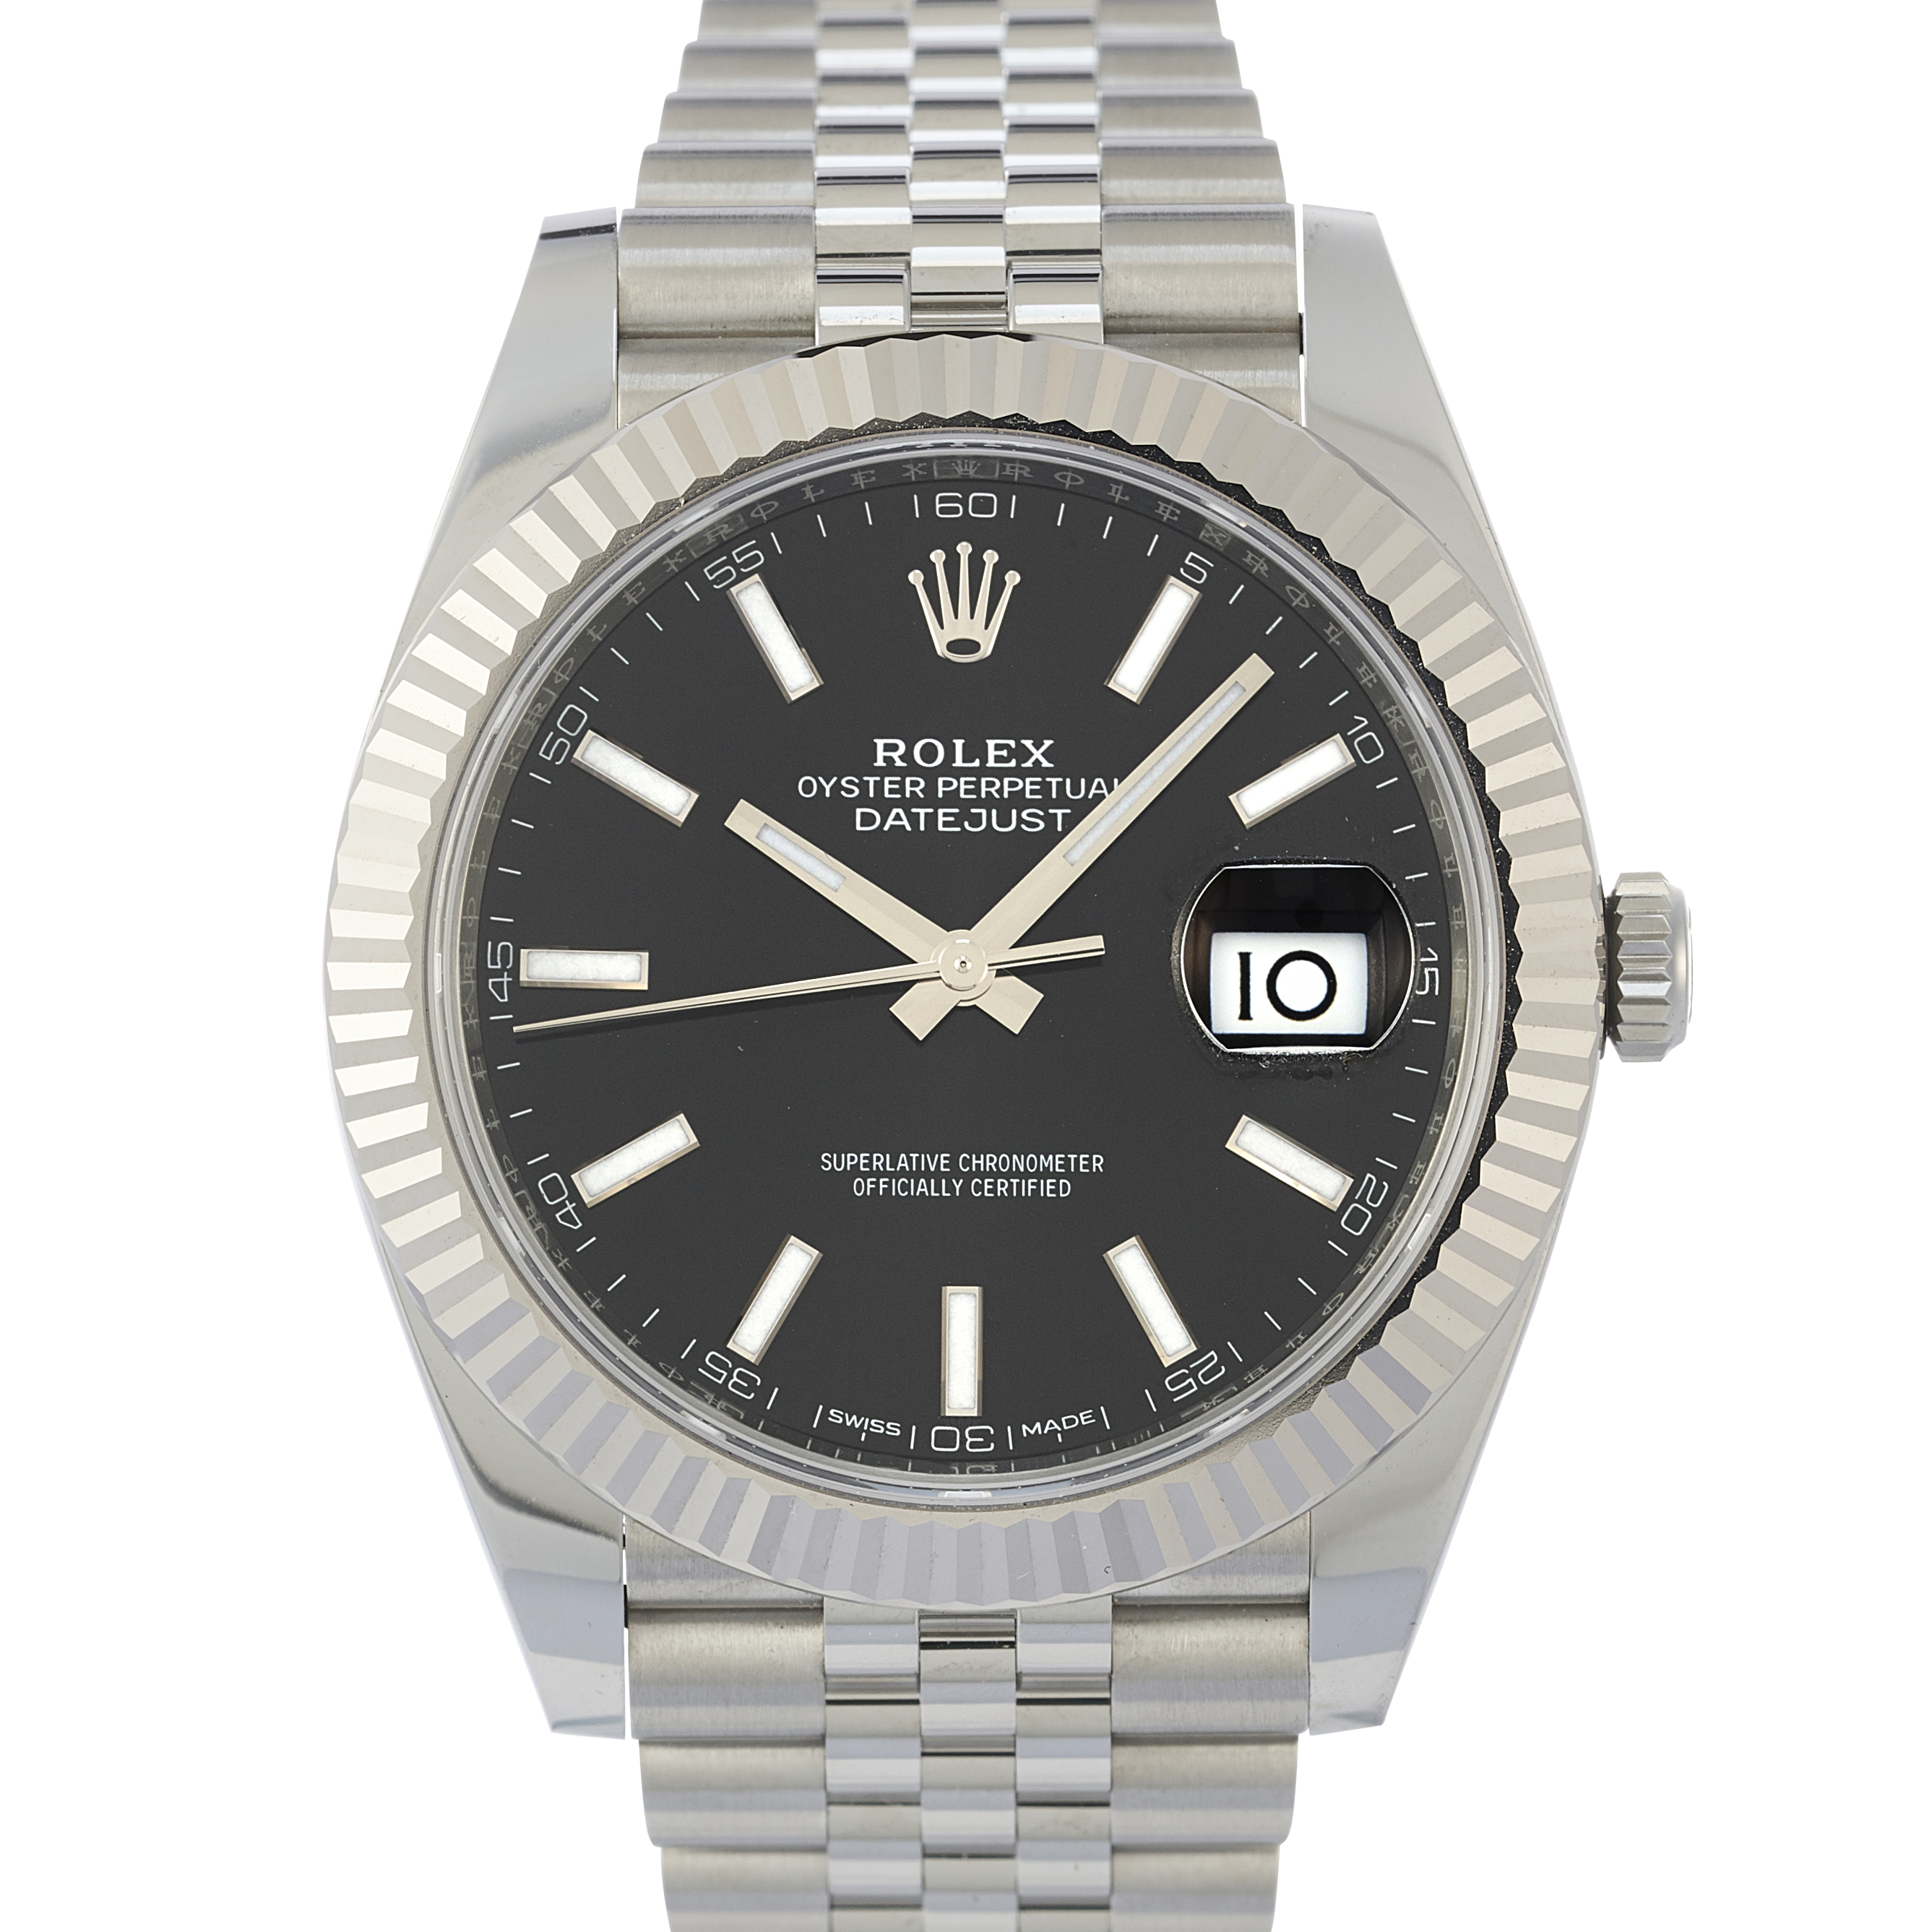 Rolex Datejust 126334 in Stainless 